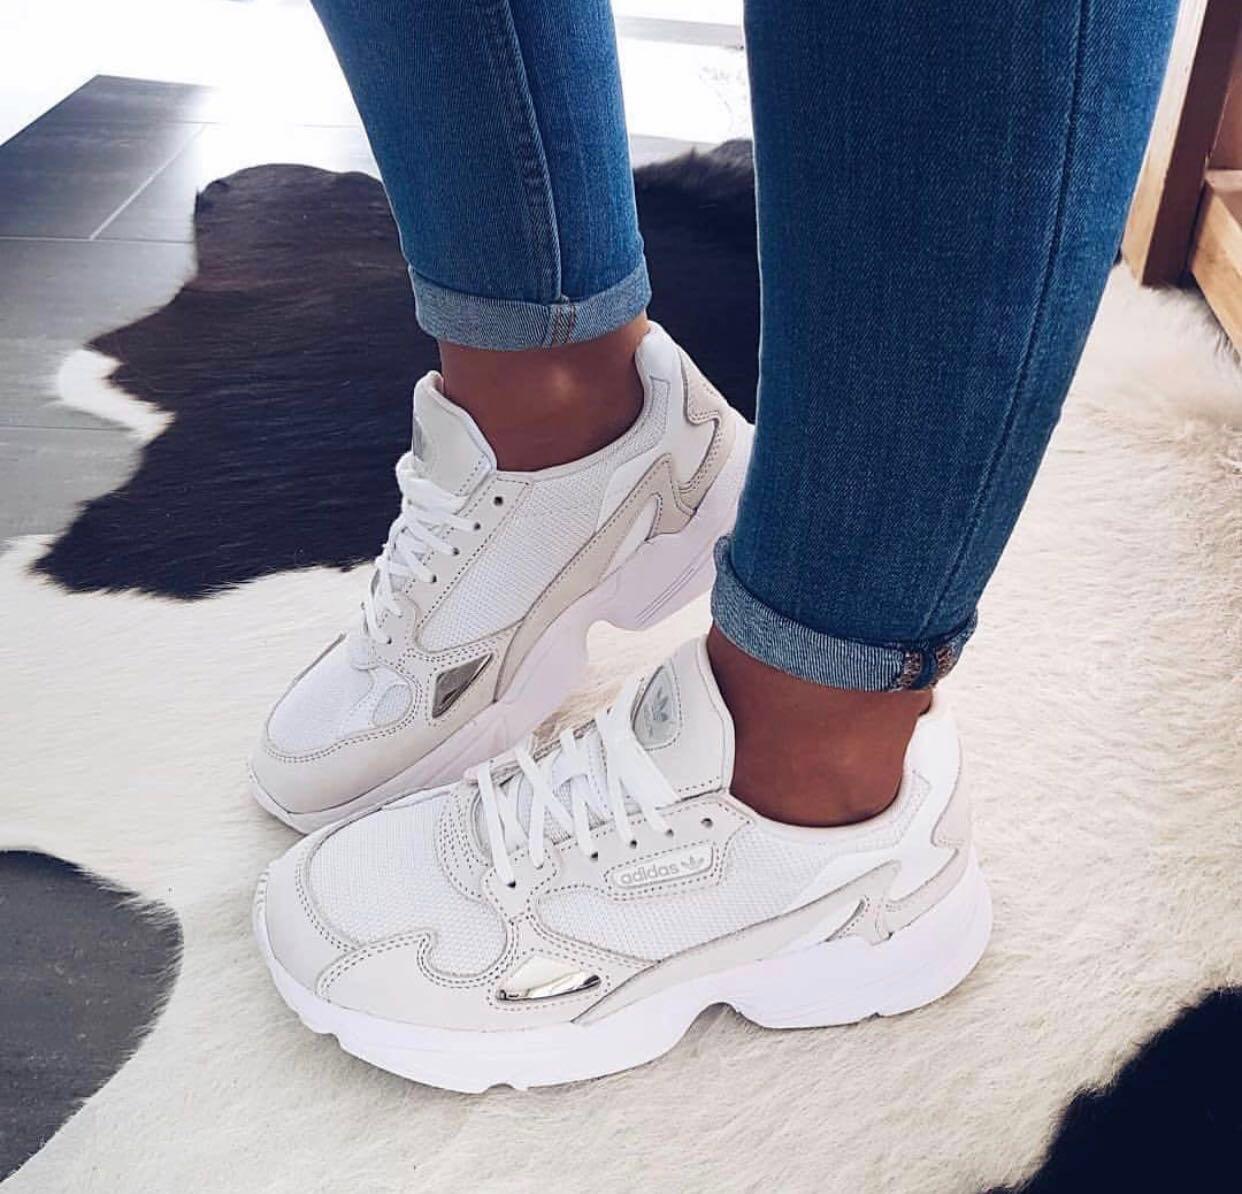 kylie jenner white adidas shoes